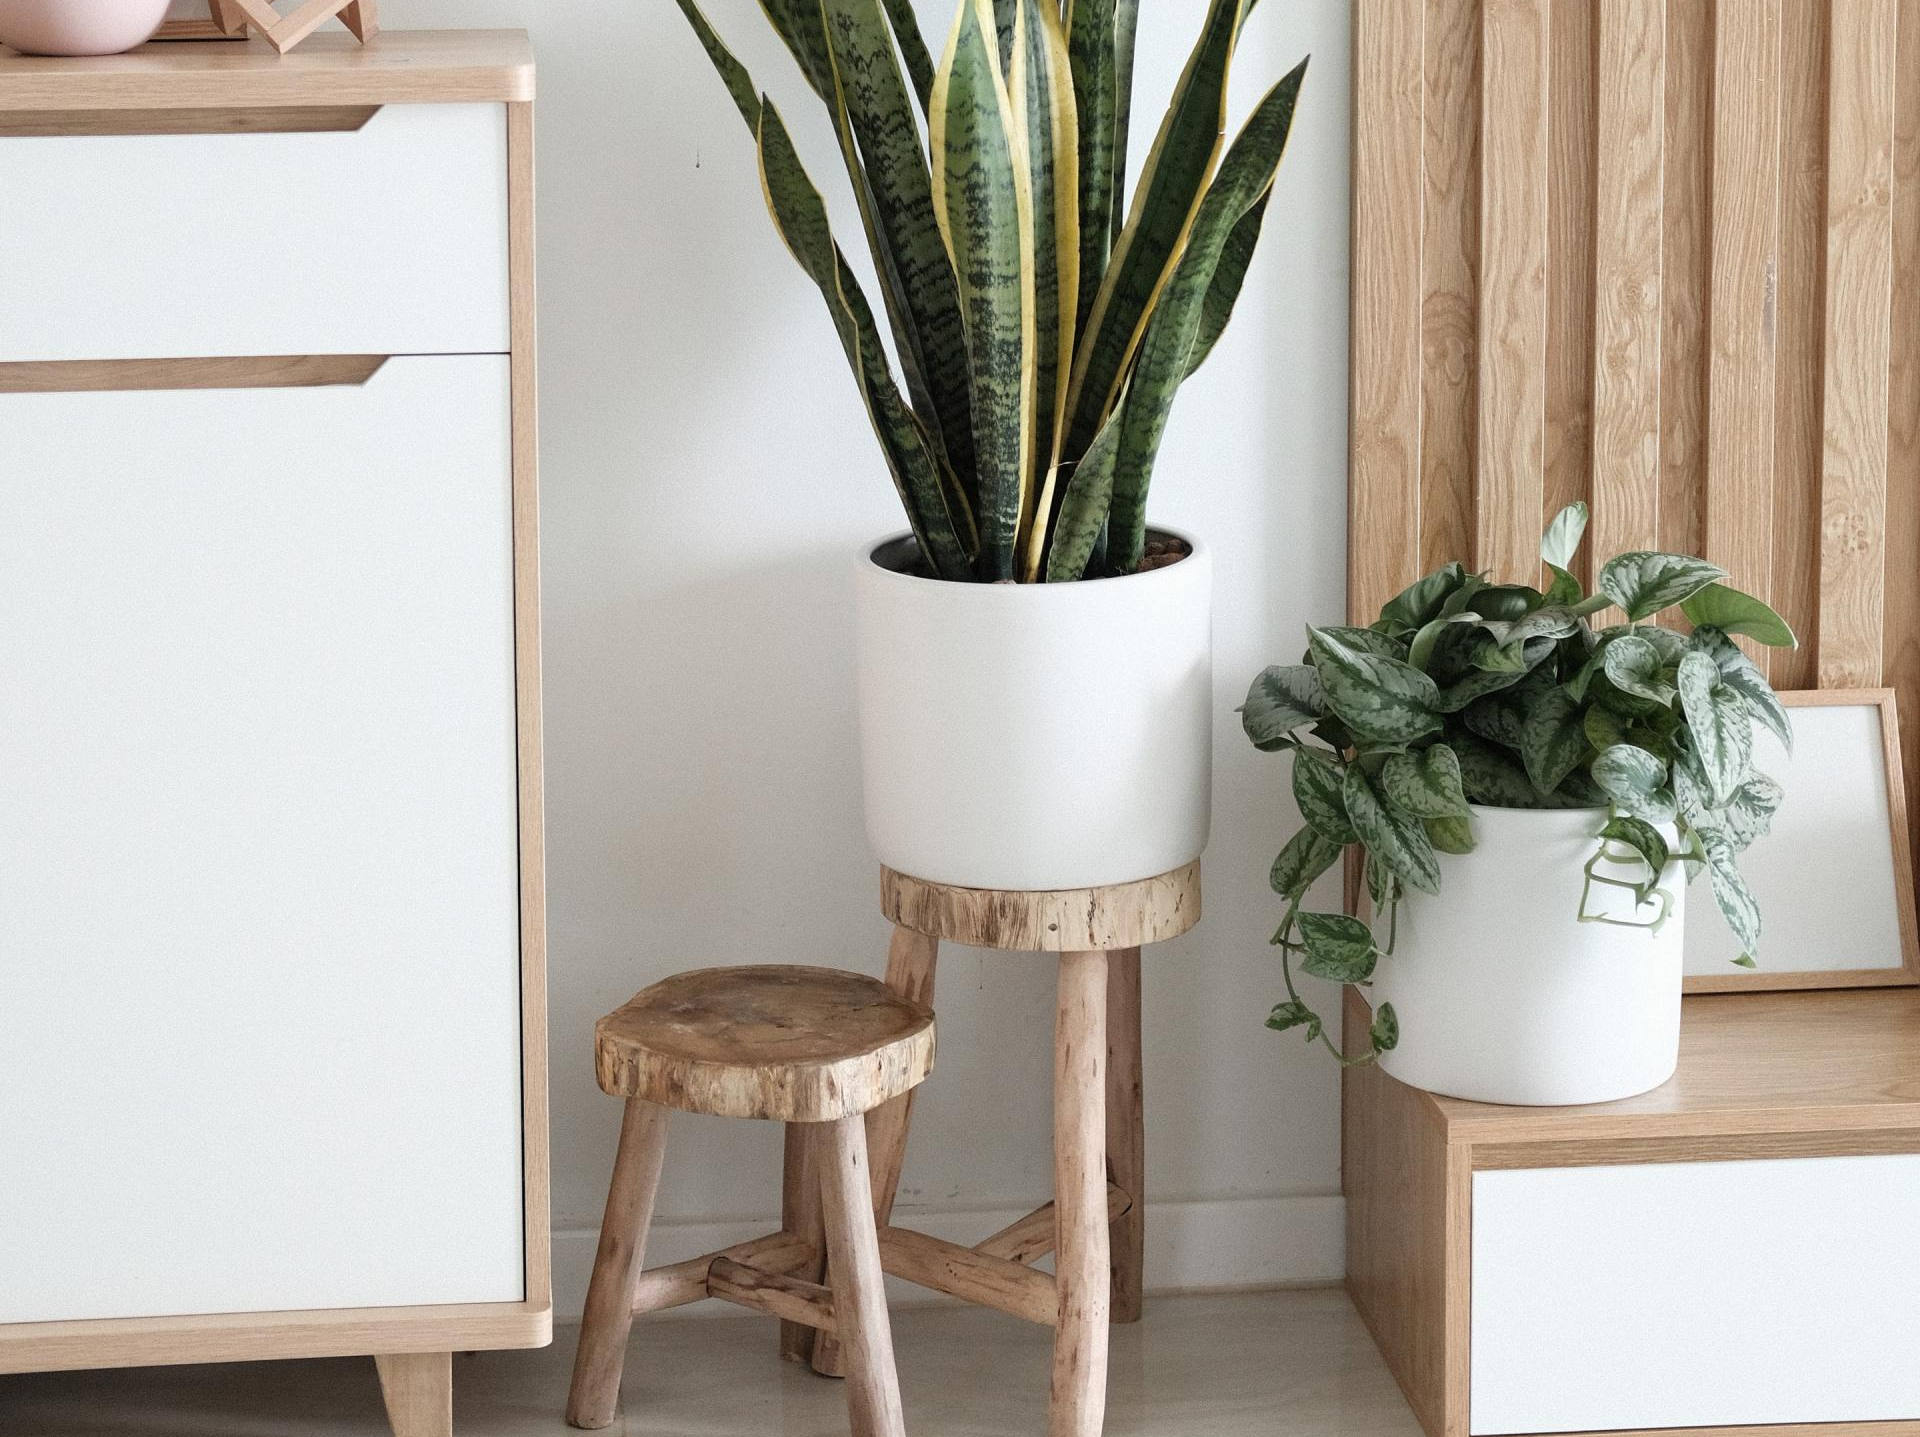 white and wood tone home decor and plants